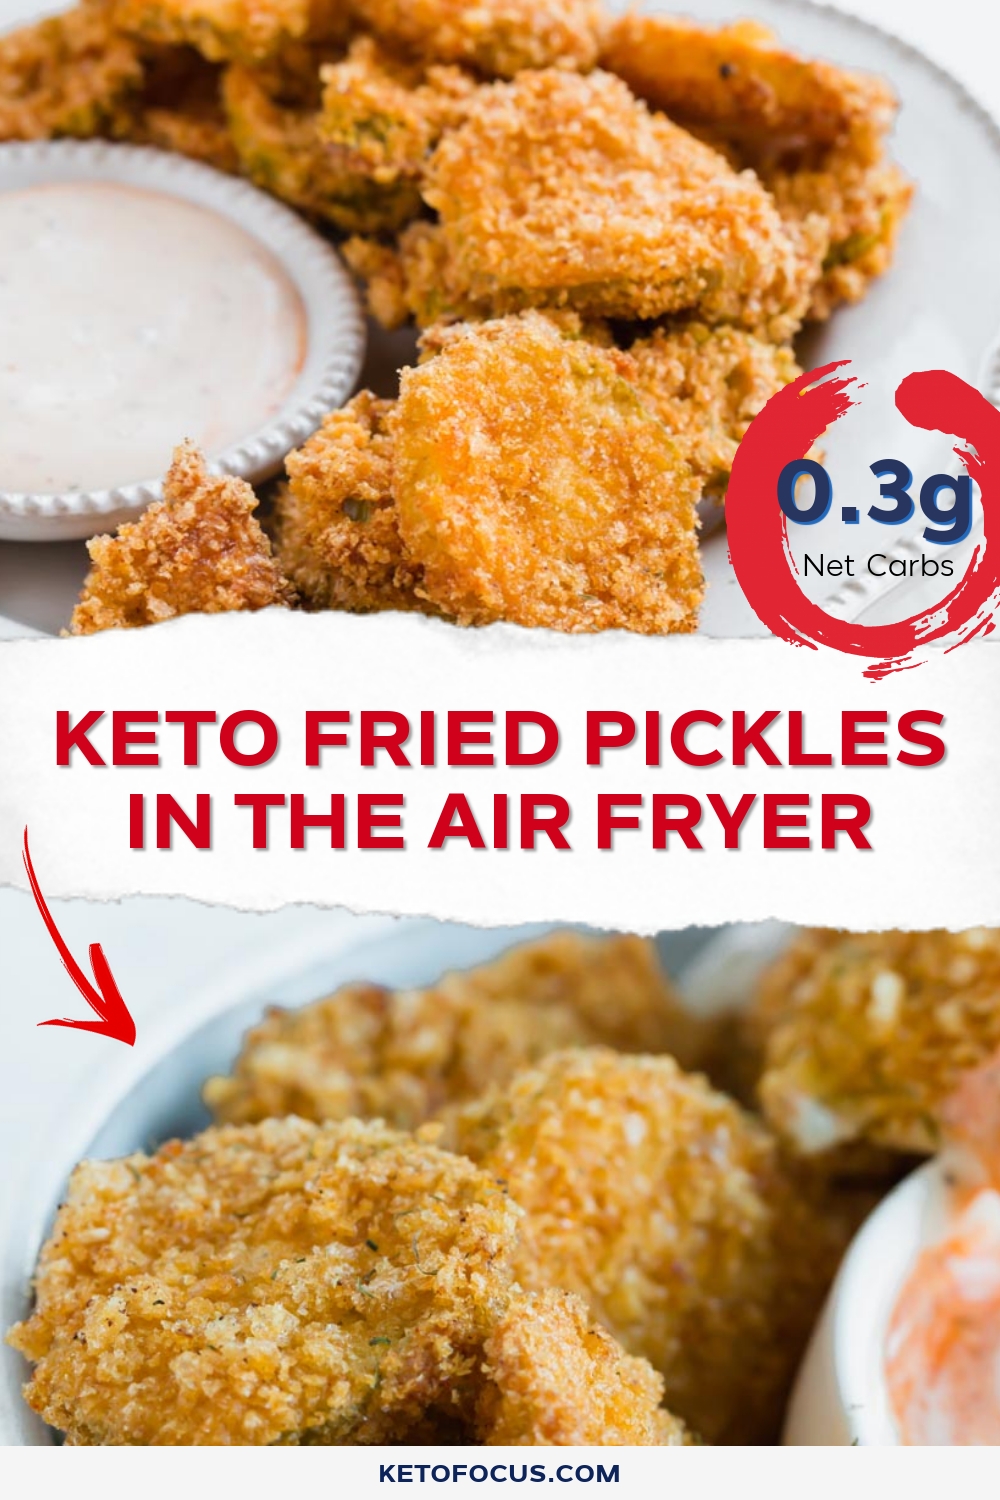 Keto Fried Pickles in the Air Fryer